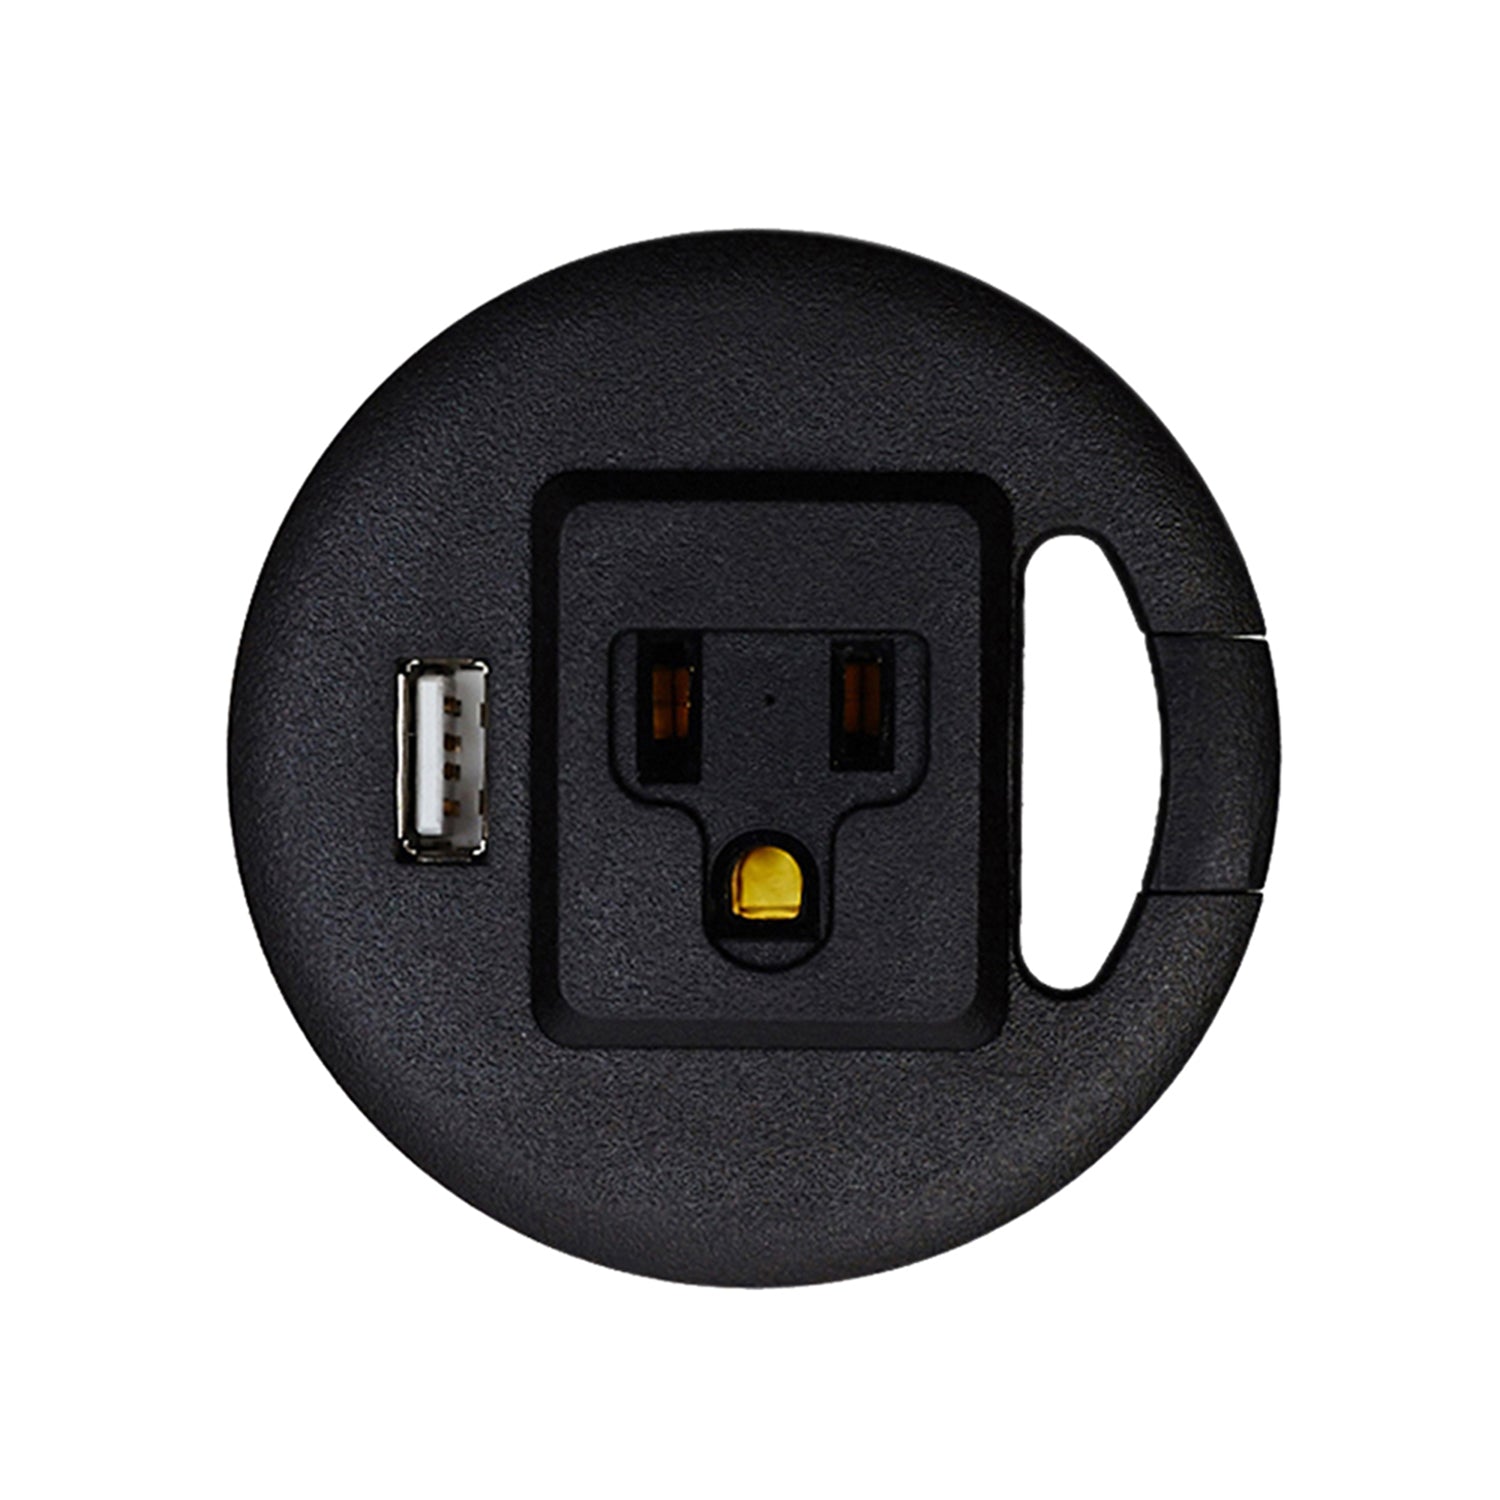 Table Top Power & USB Grommet Hole Adapter, Black